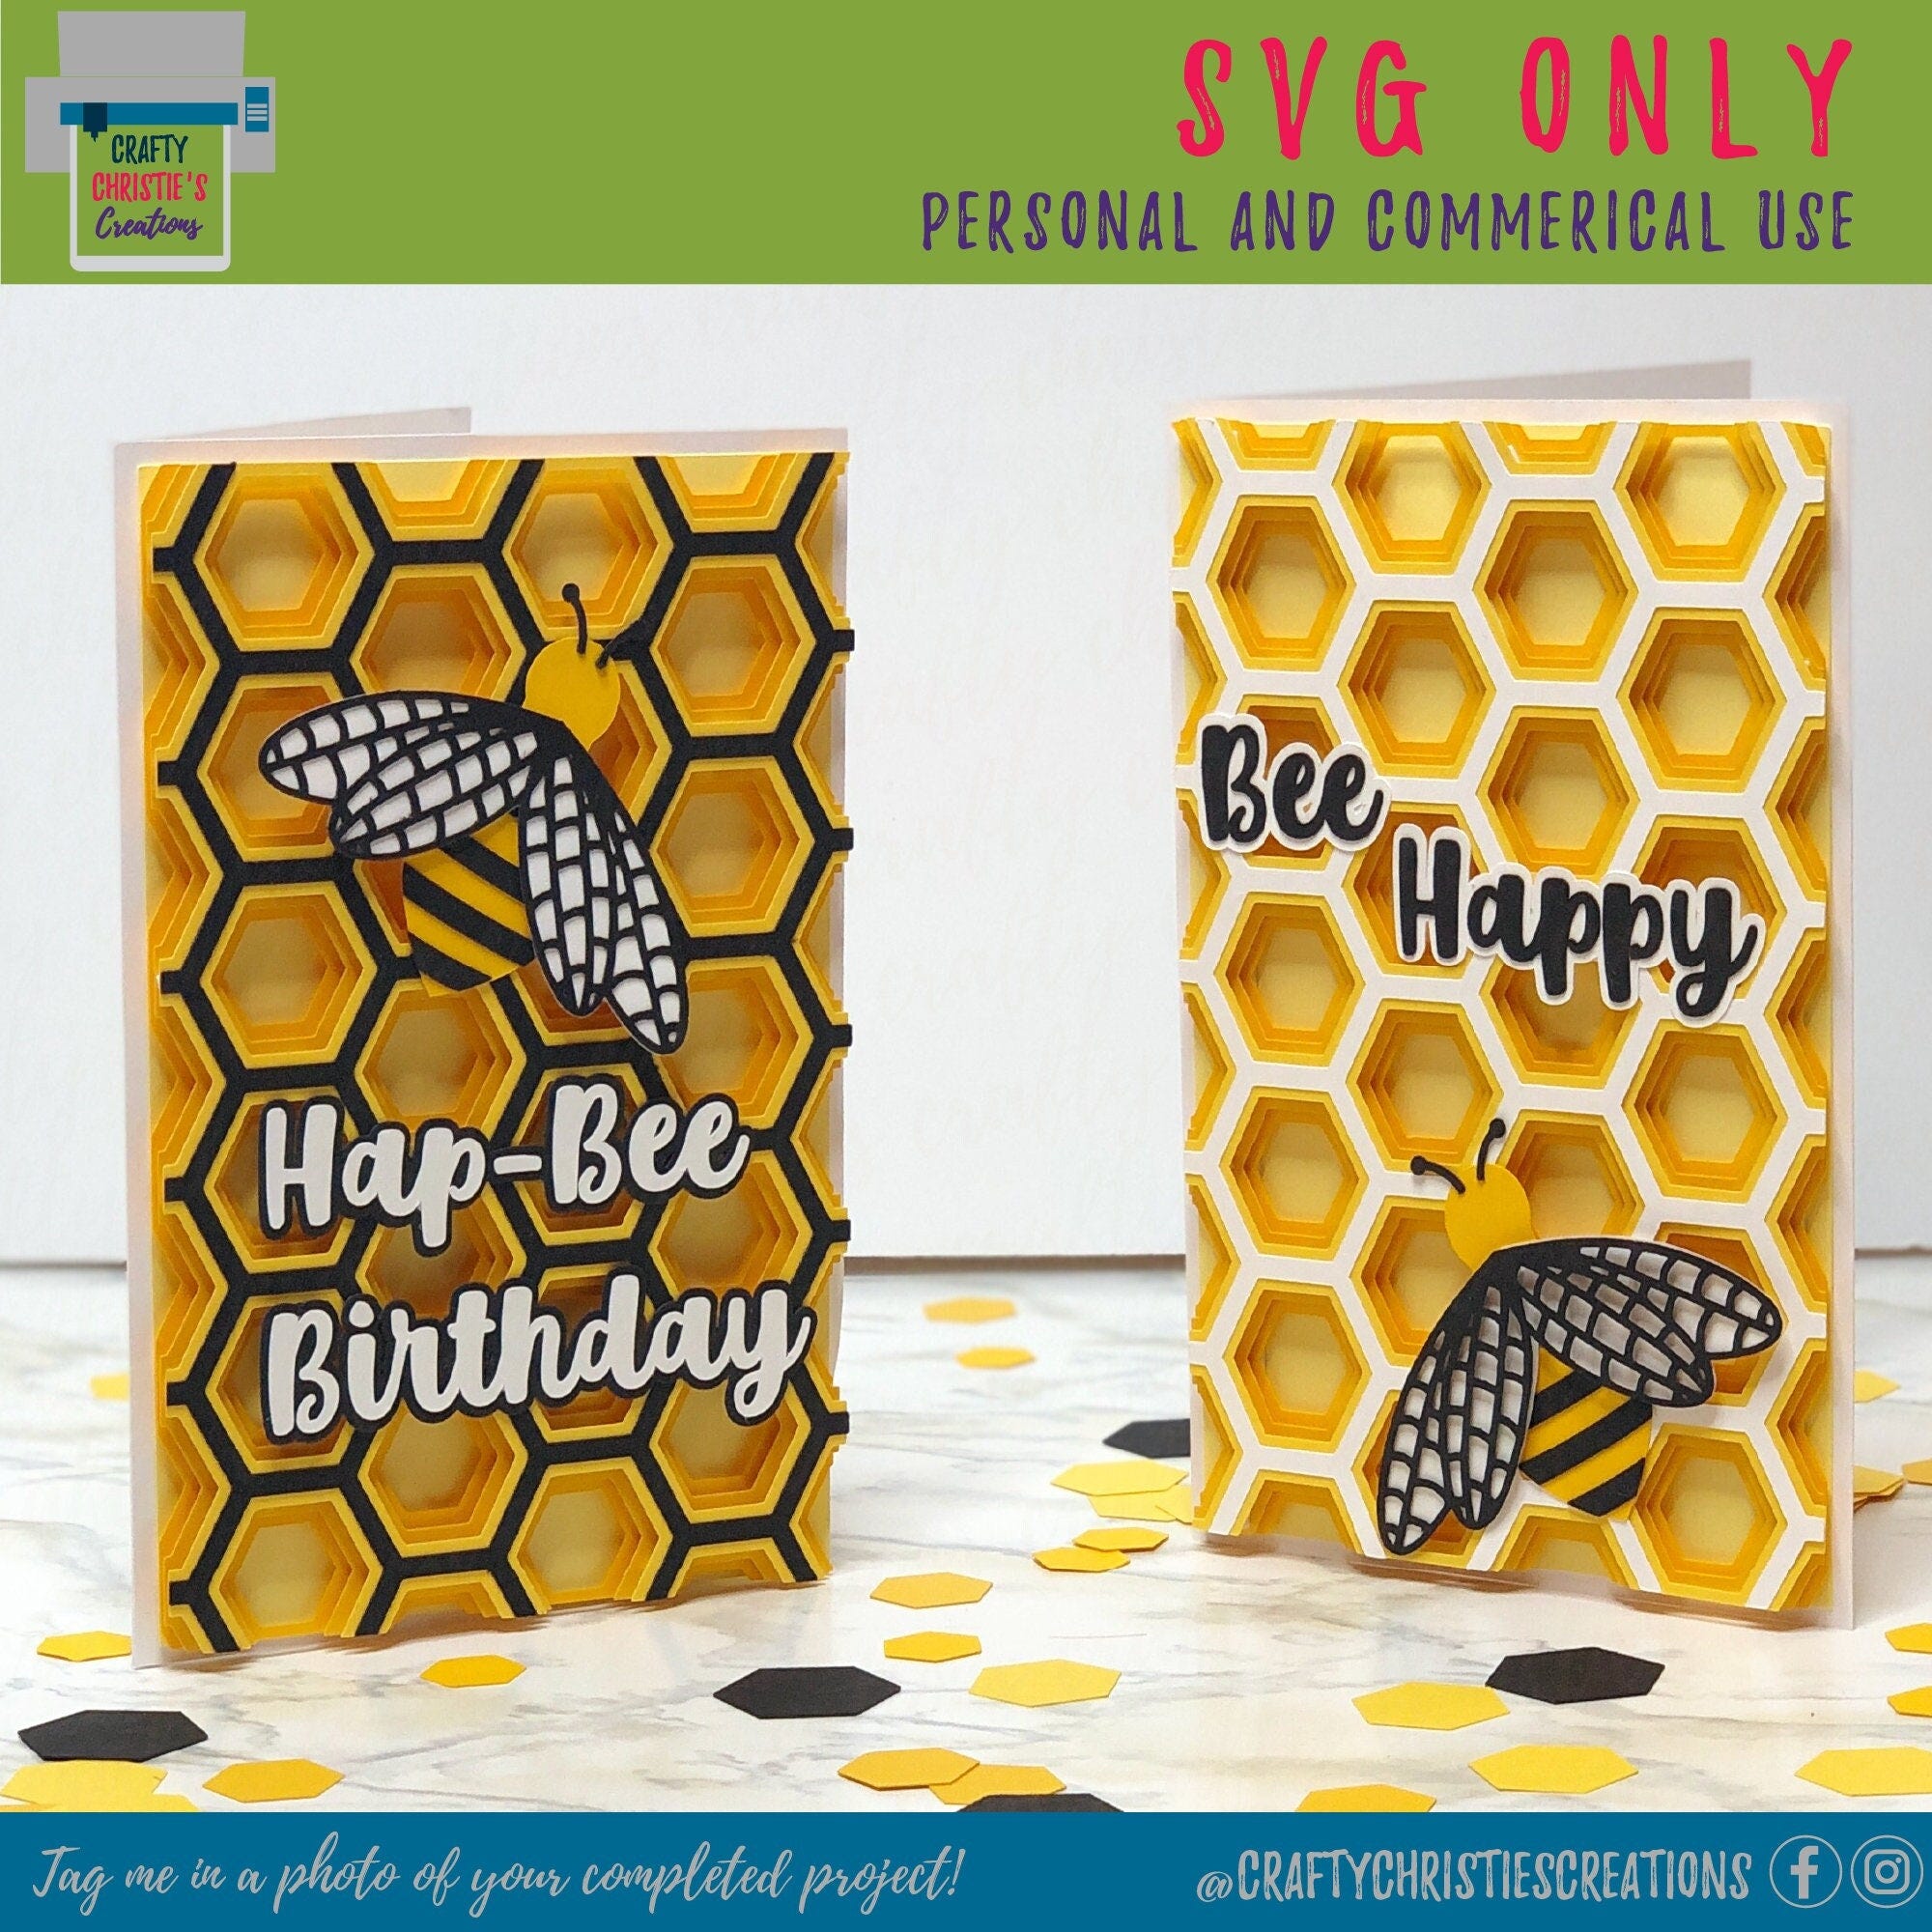 3D Layered Bee Card SVG - Birthday Card SVG - Be Happy Card SVG - Honeycomb Mandala Card Svg - Layered Card Papercraft - Cricut - Silhouette